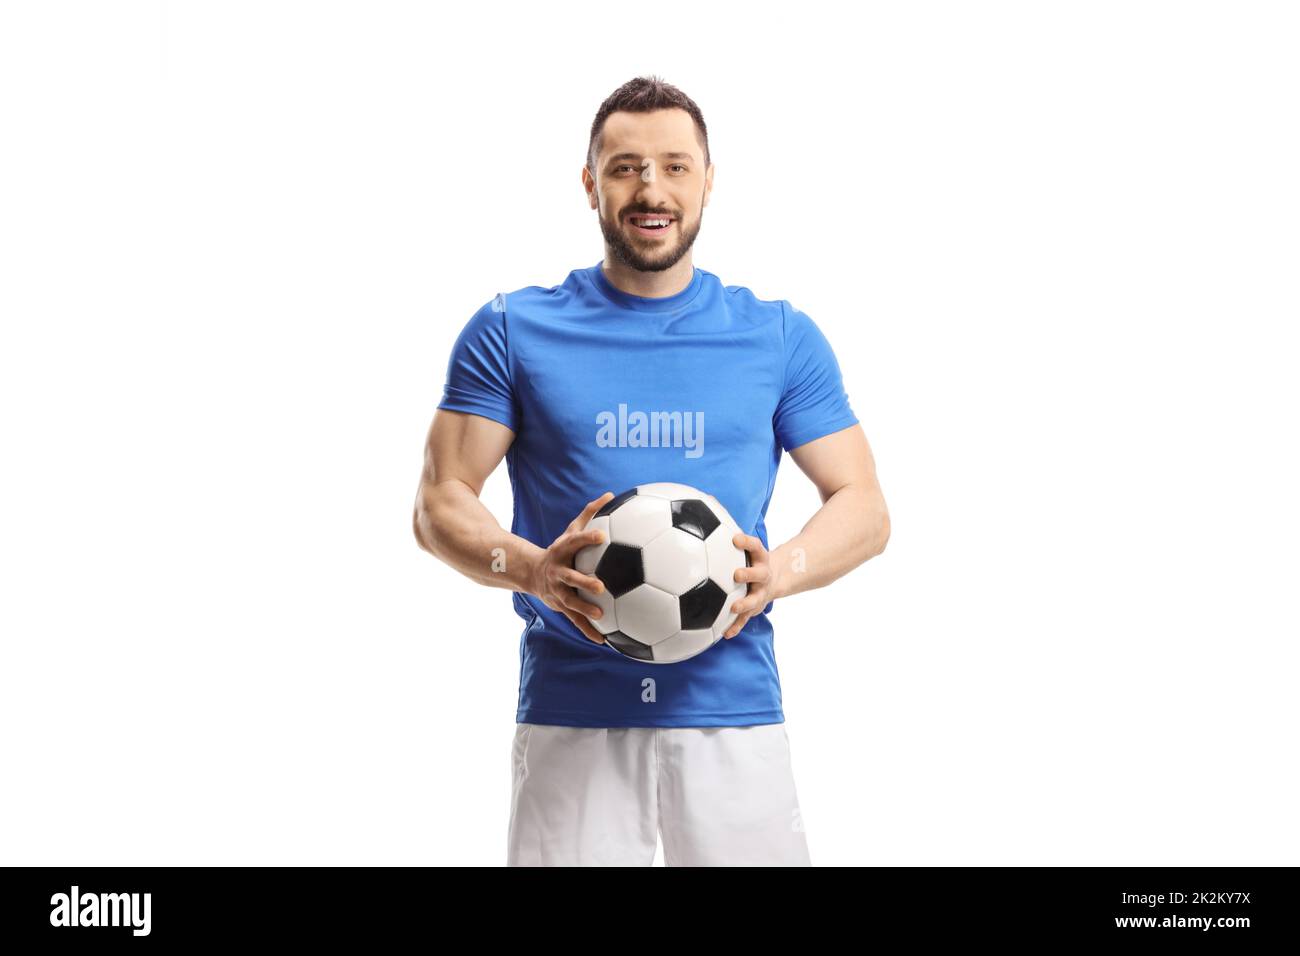 Soccer player holding a ball and looking at camera isolated on white background Stock Photo